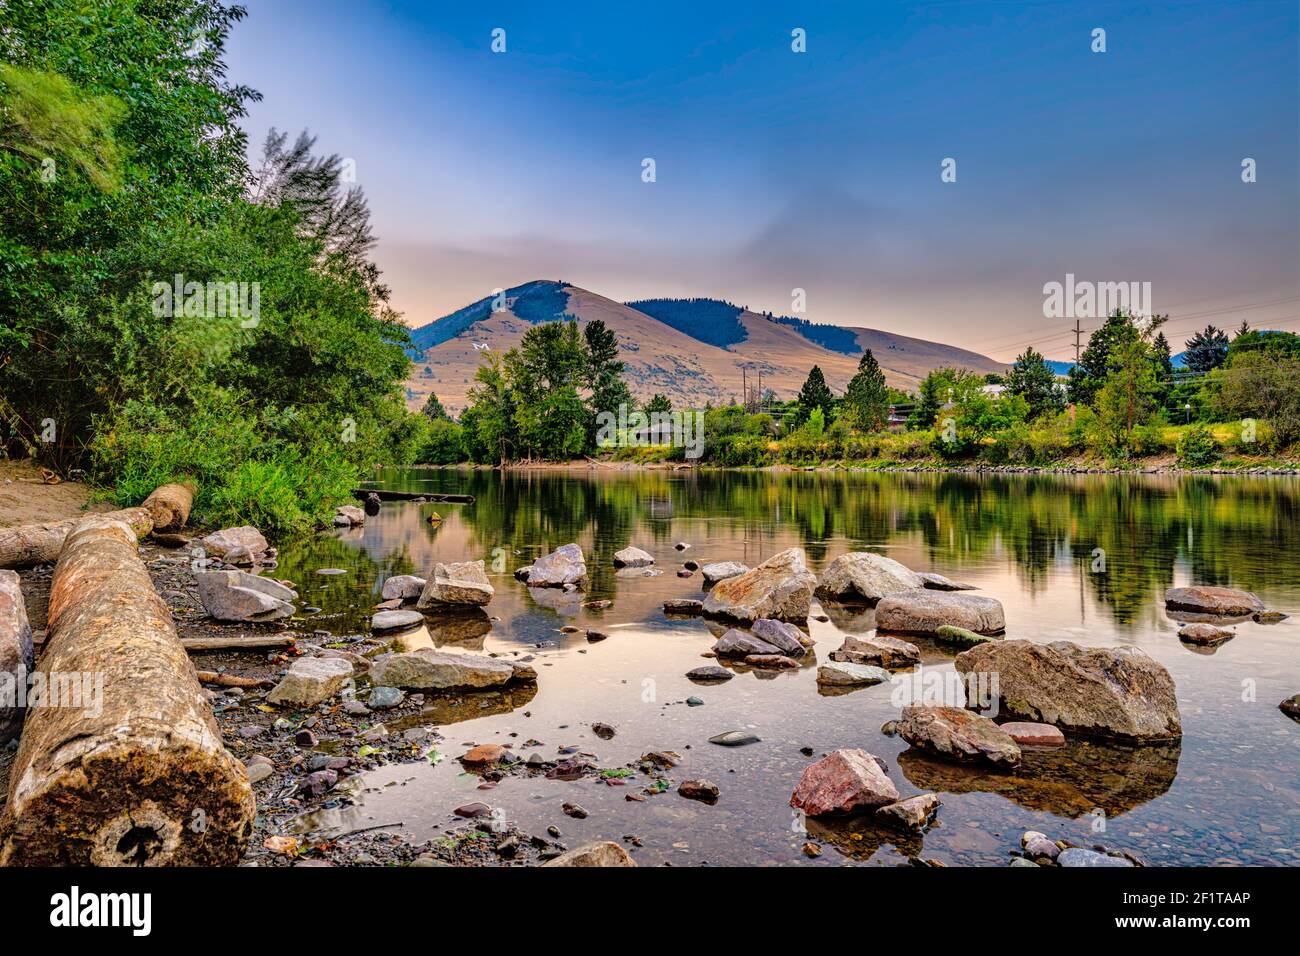 Clark Fork River in Missoula Montana, with Mount Sentinel in the background Stock Photo